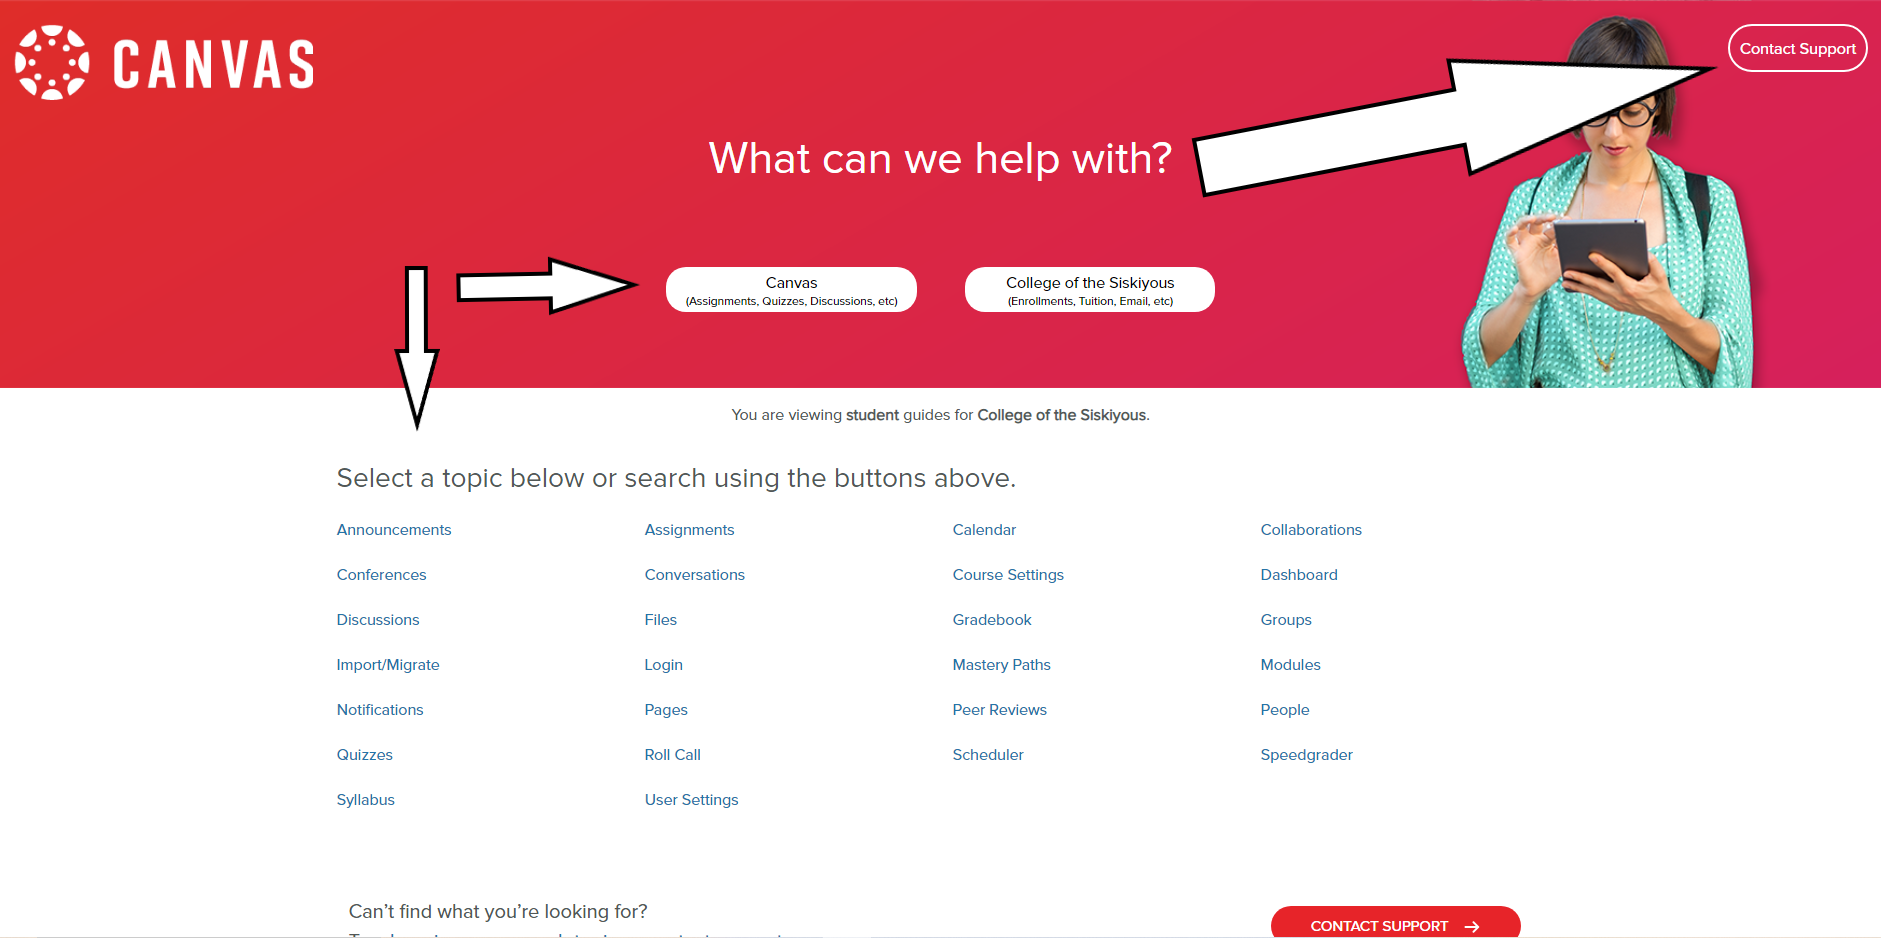 Canvas support page showing links to search buttons and support options